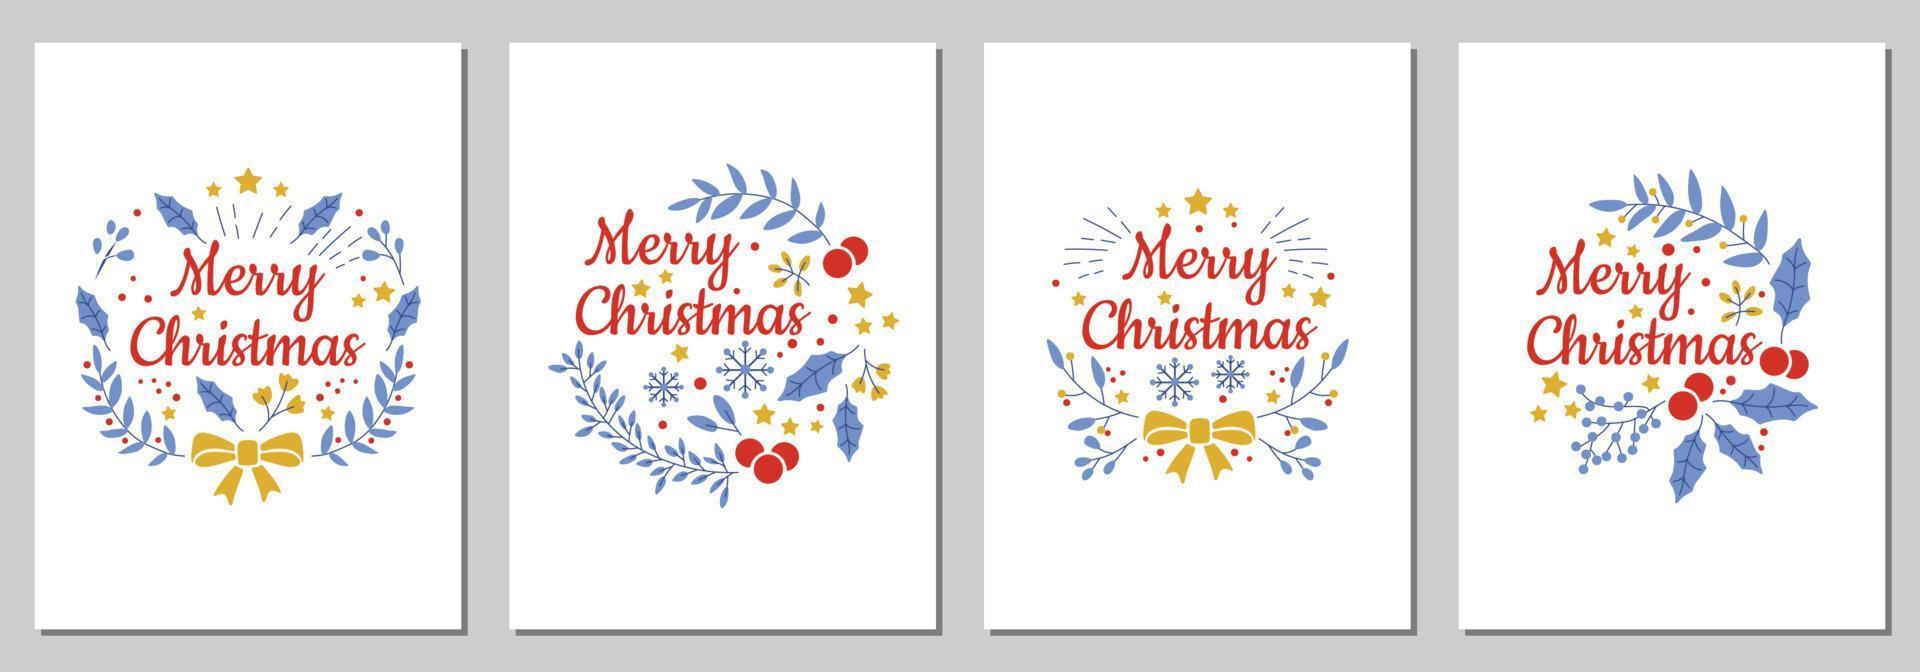 Christmas cards with merry christmas with xmas decorations and typography design. Vector illustration.